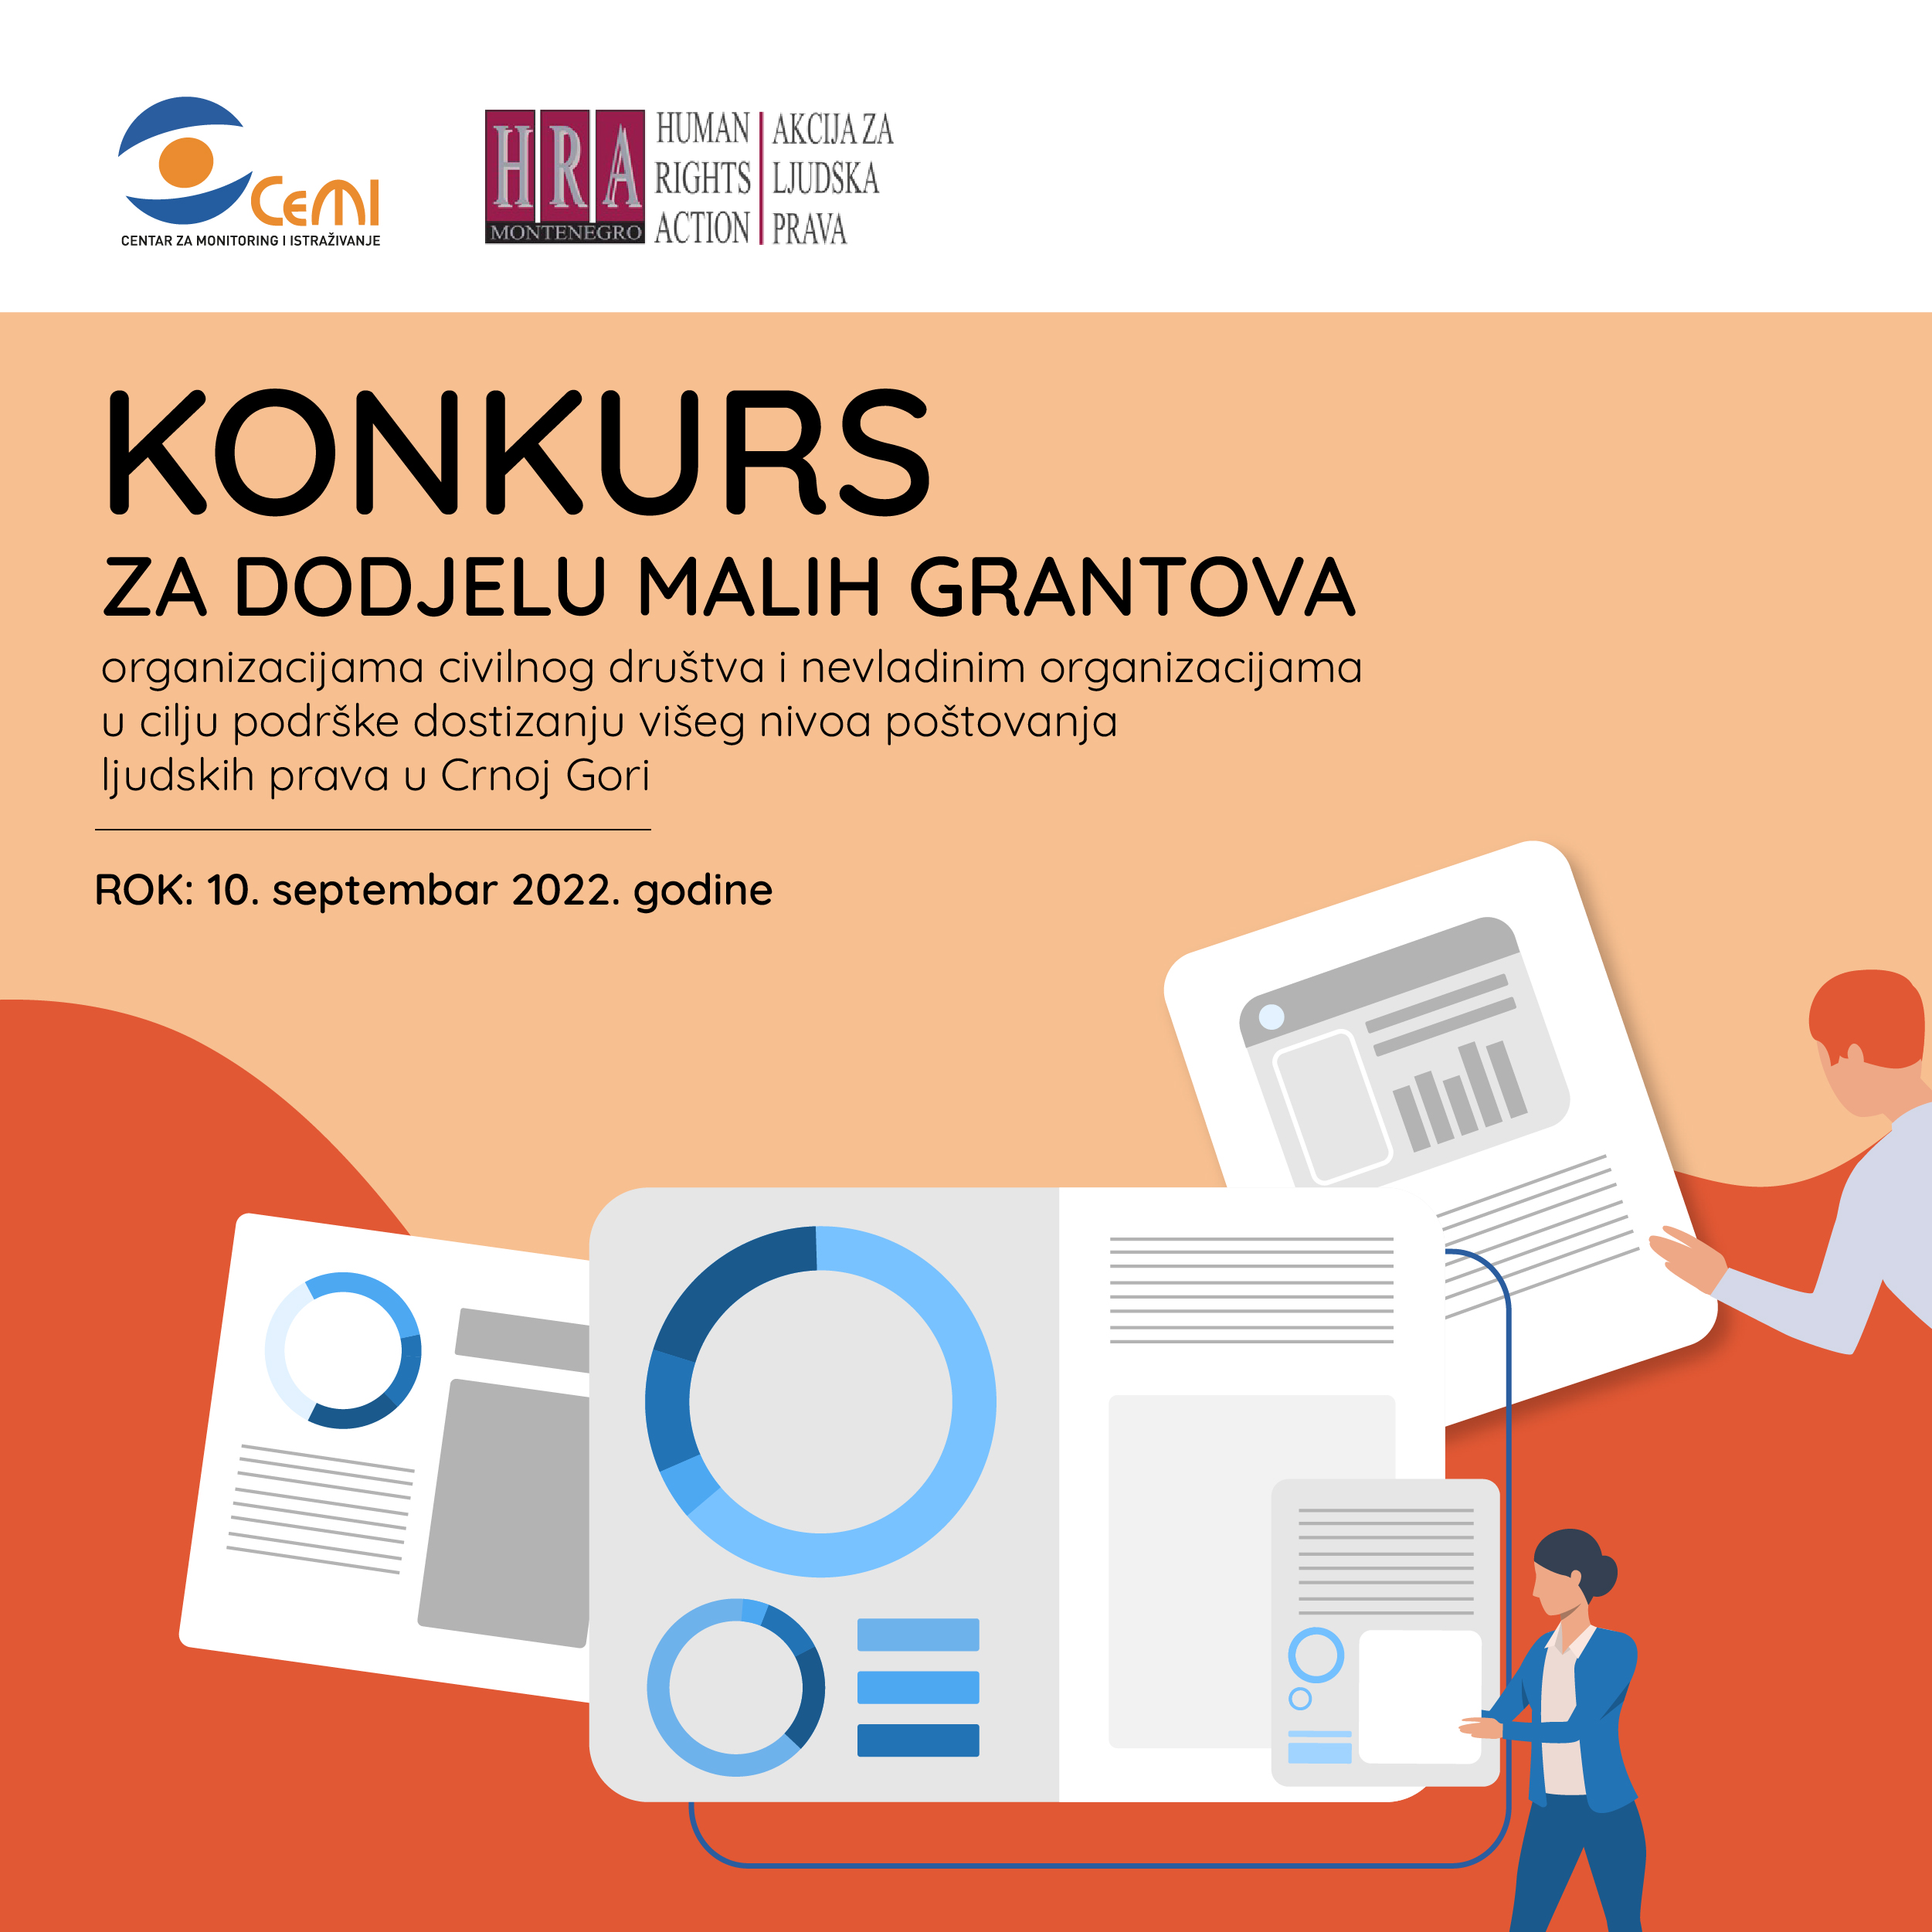 Call for small grants to registered and unregistered CSOs and NGOs in Montenegro